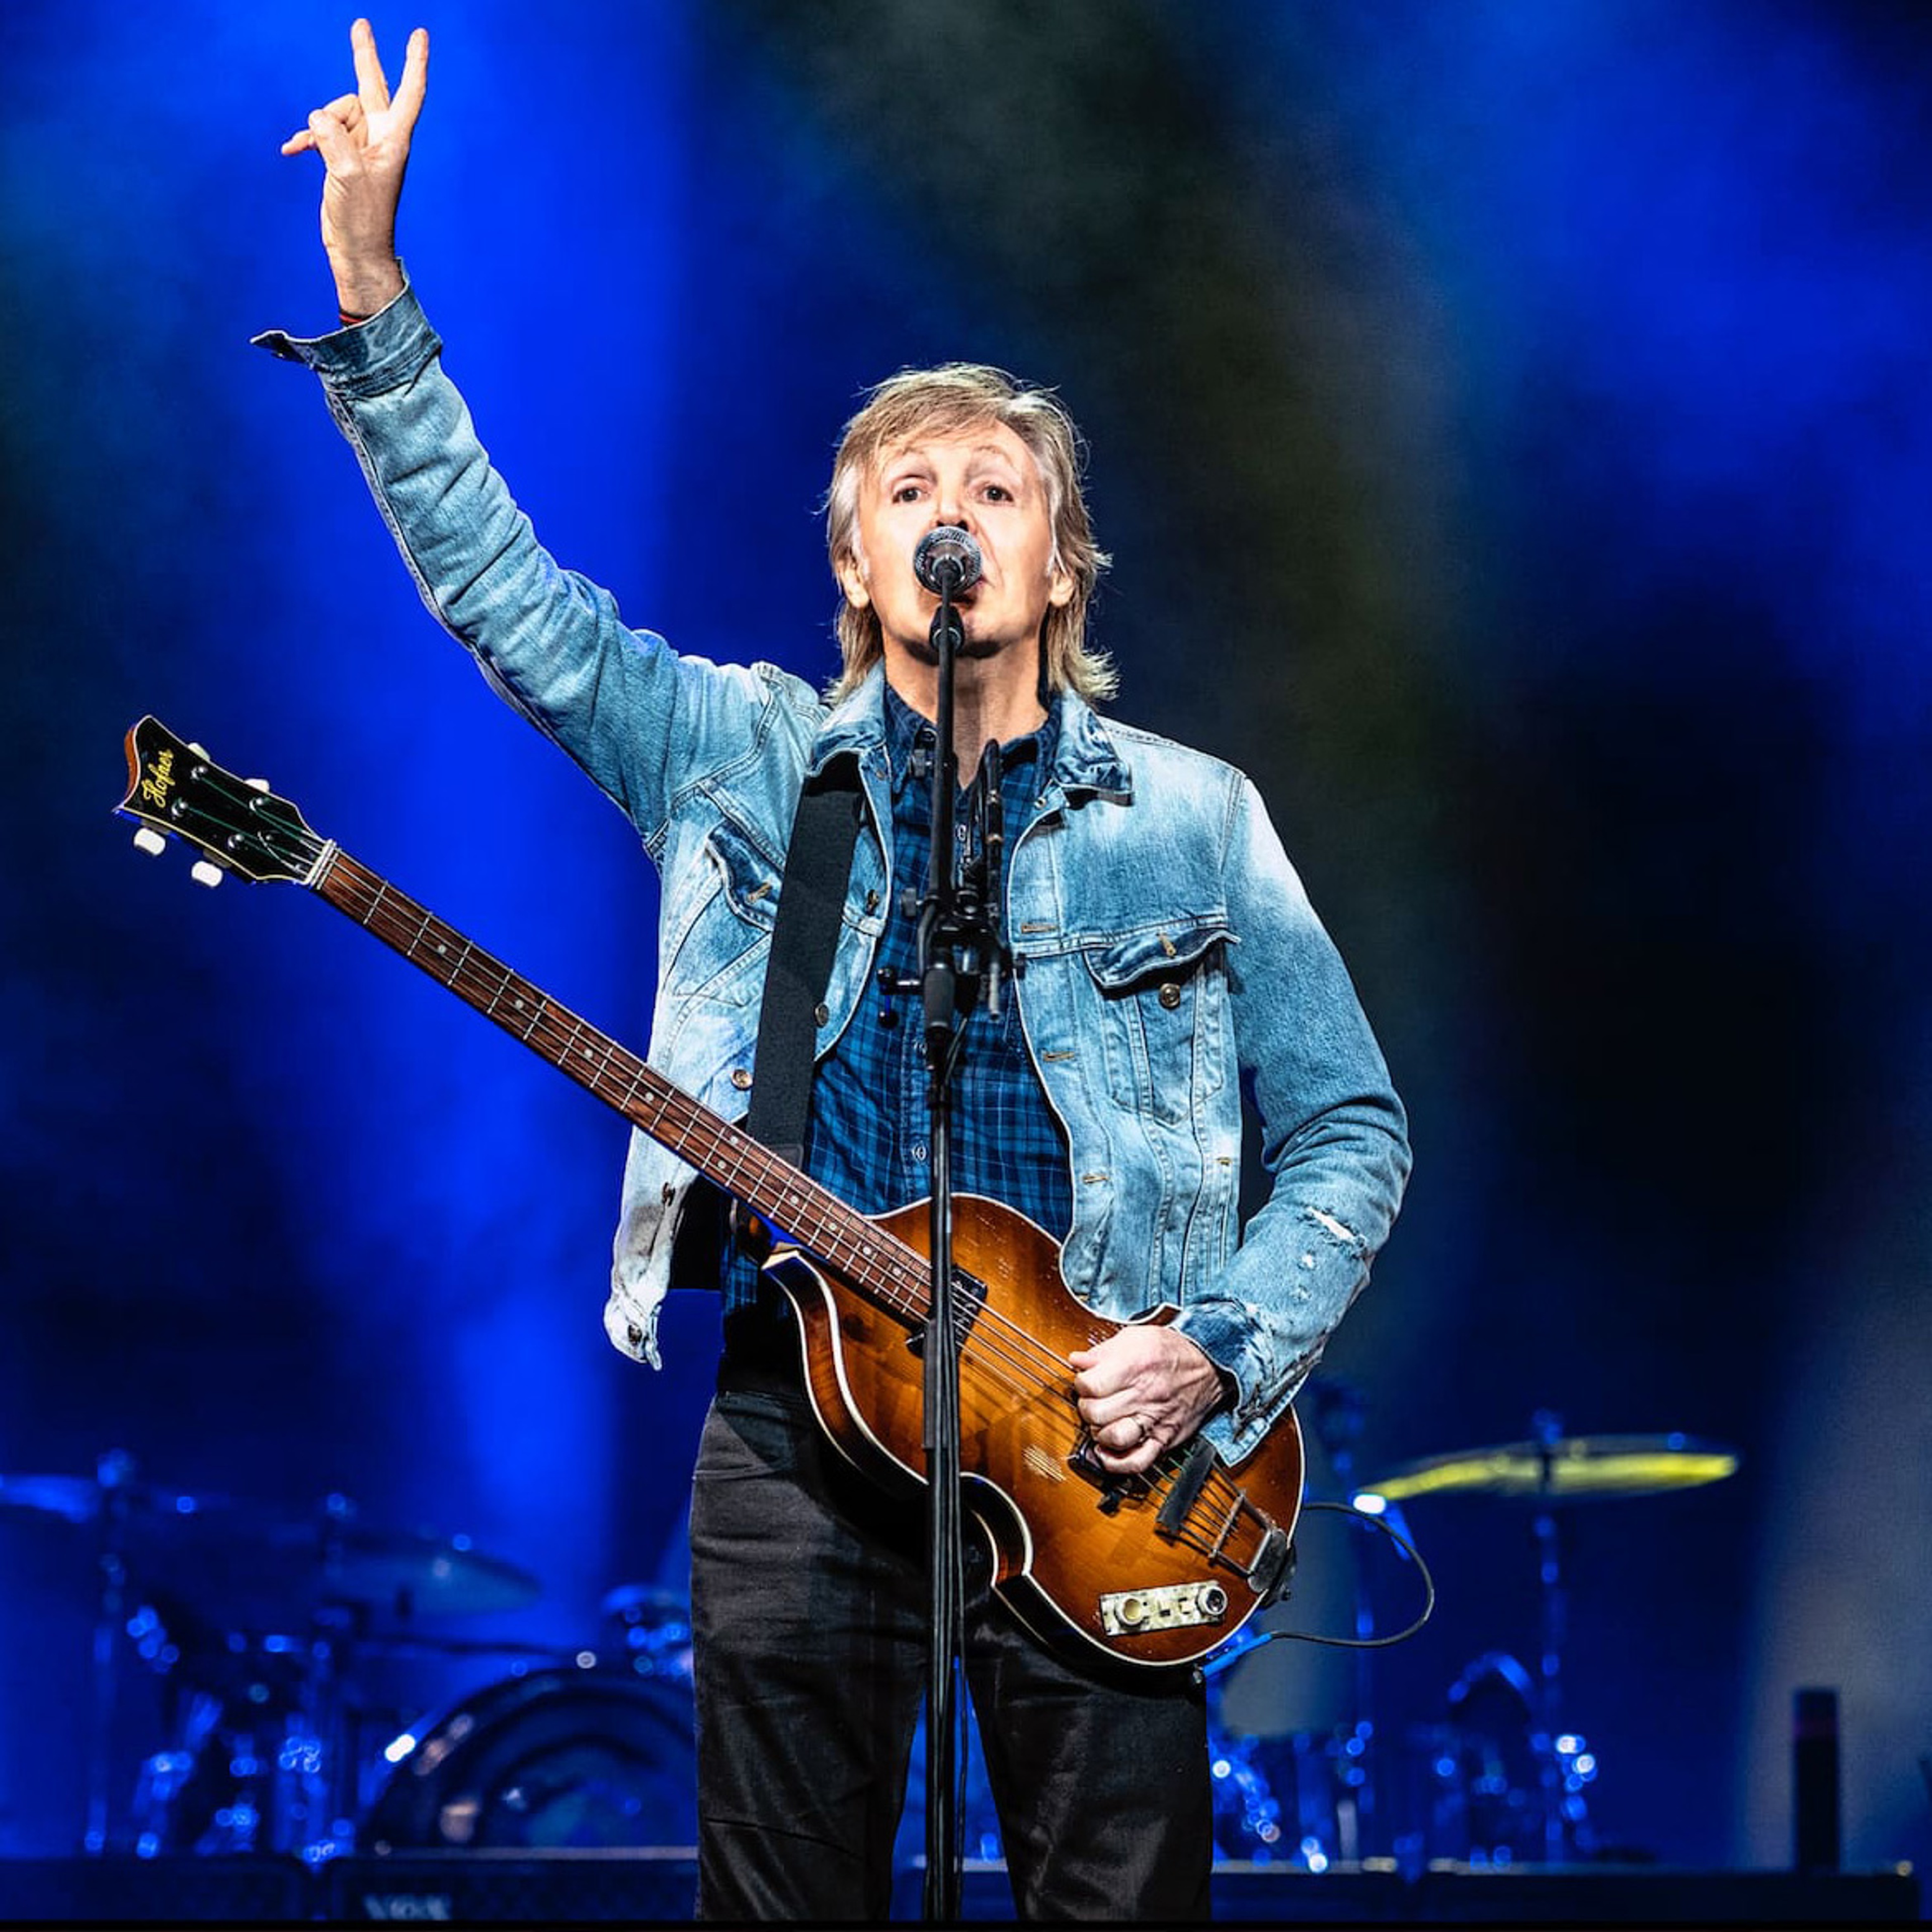 Photo of Paul performing in 2019 with his Hofner bass guitar and making a peace sign